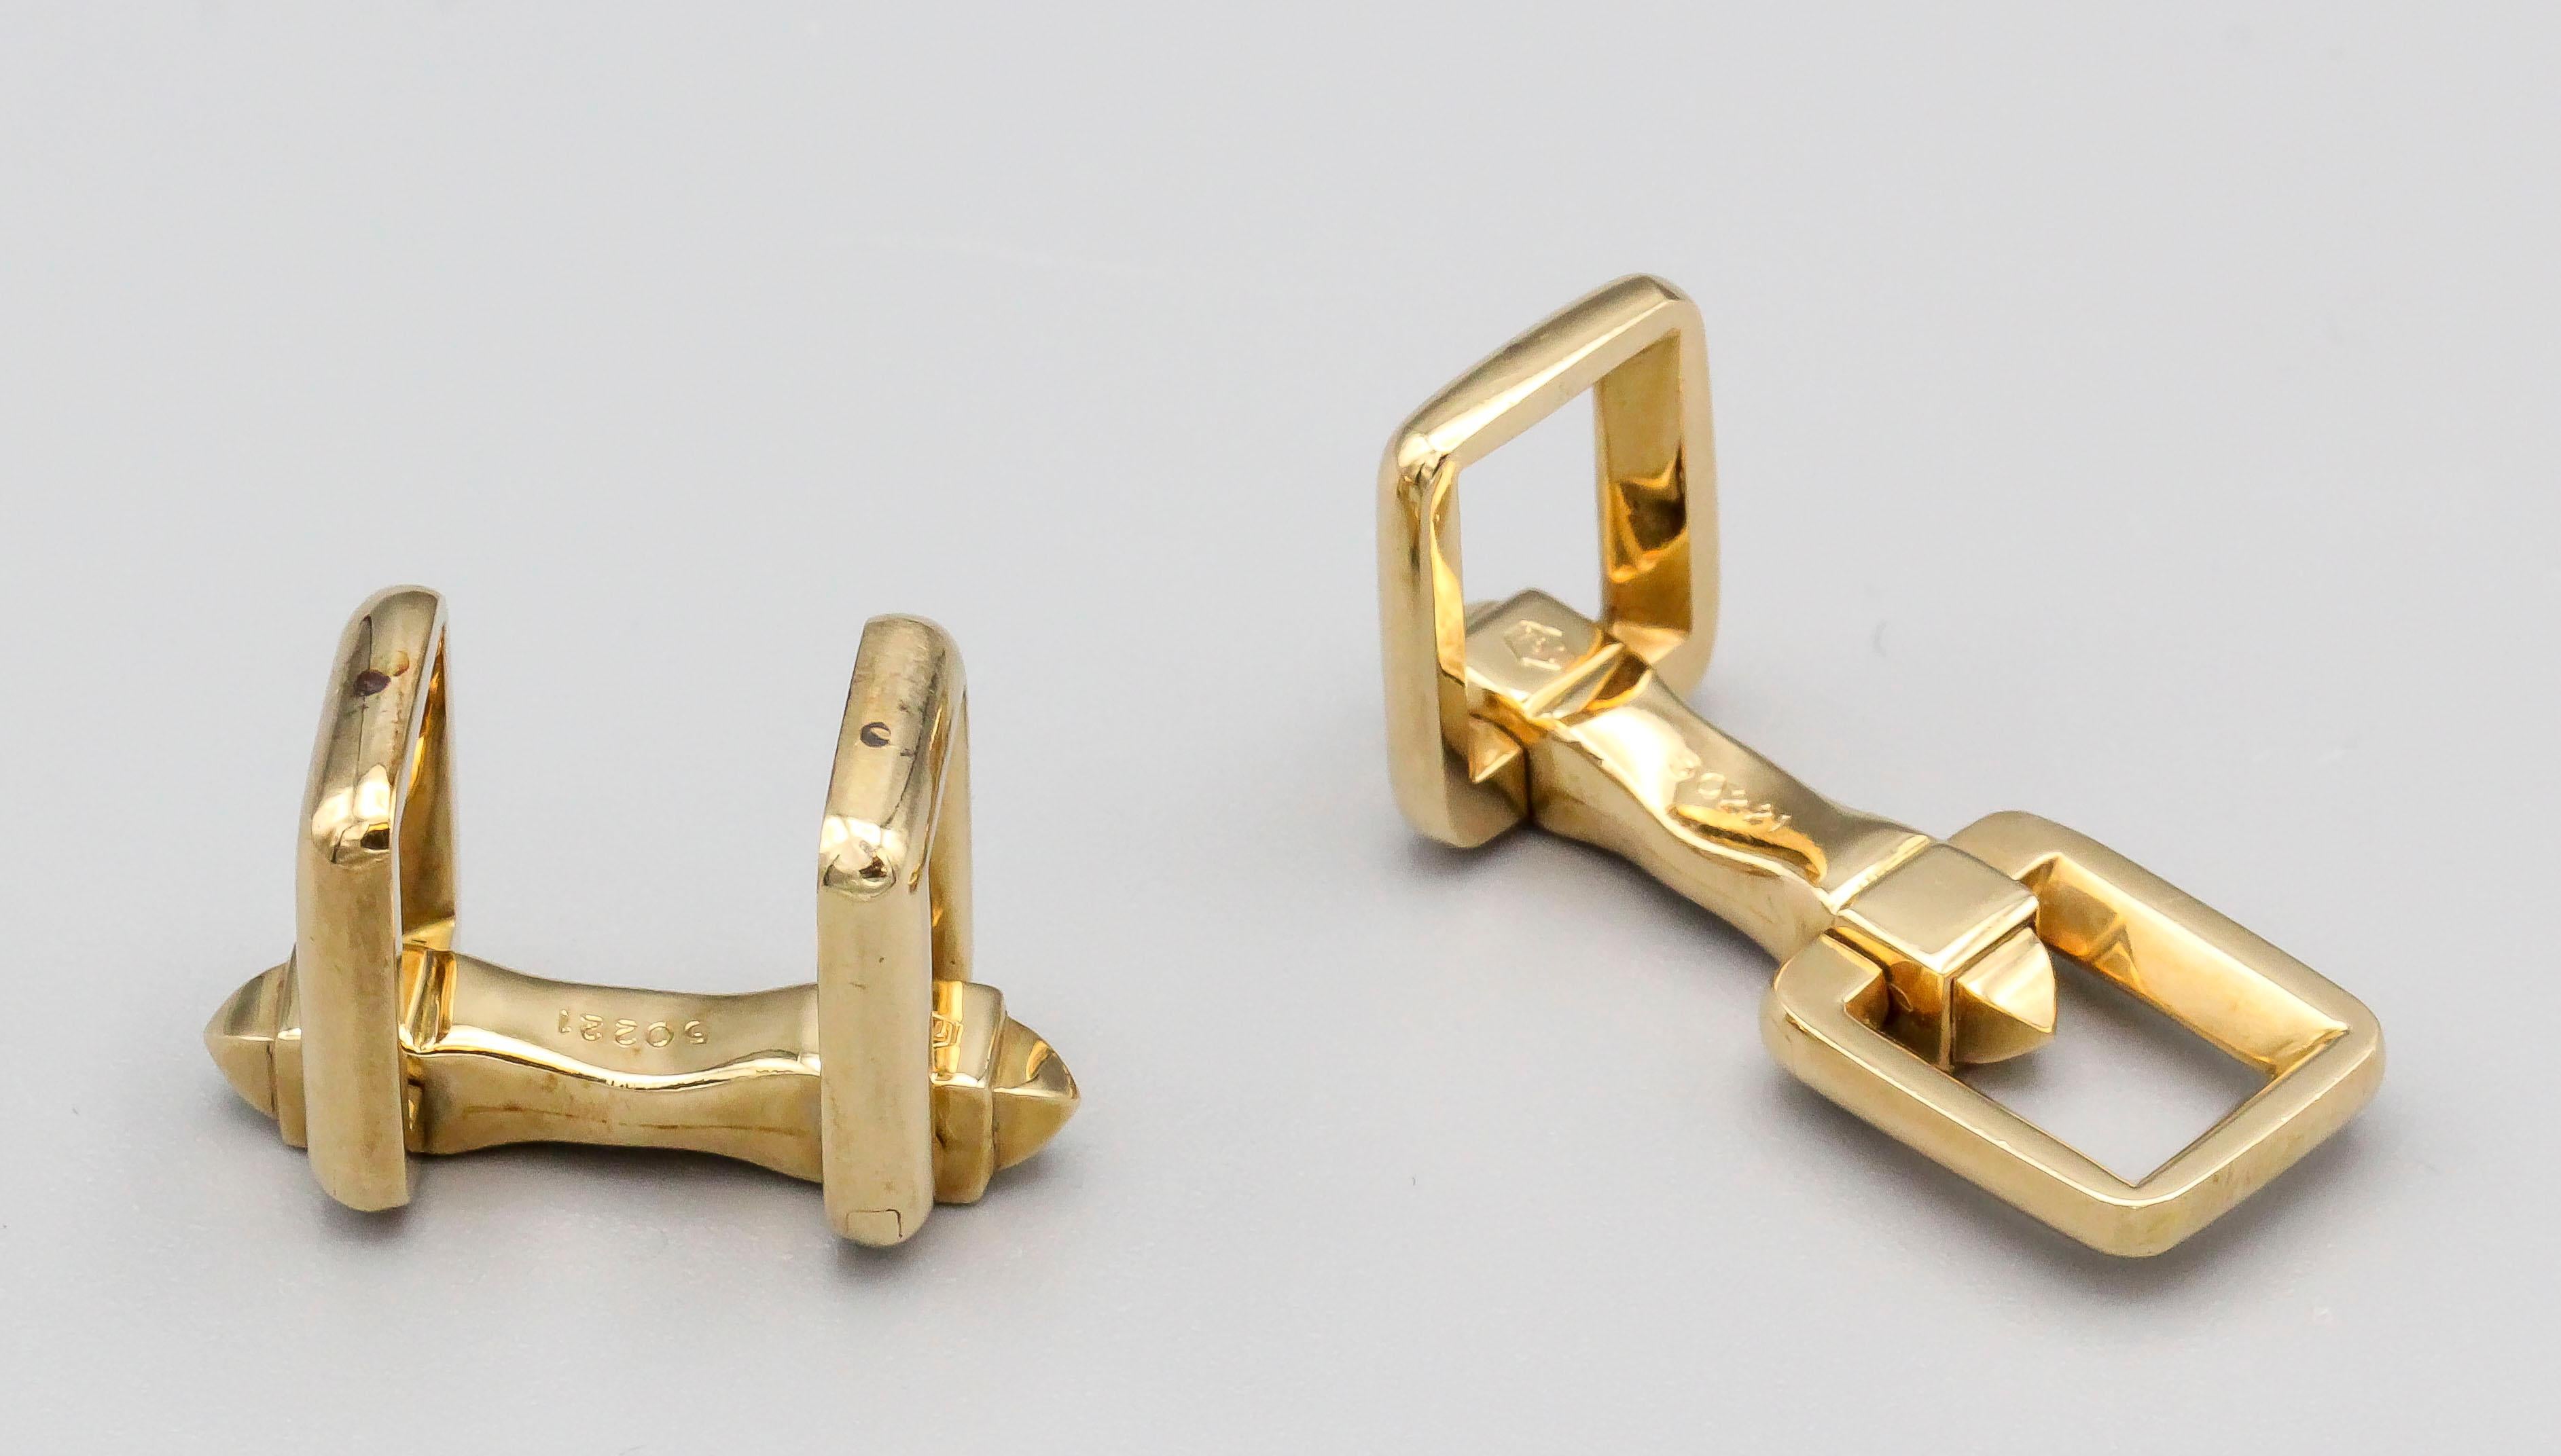 Fine pair of 18k gold folding cufflinks by Cartier, circa 1950s.

Hallmarks: Cartier, 750, reference numbers.